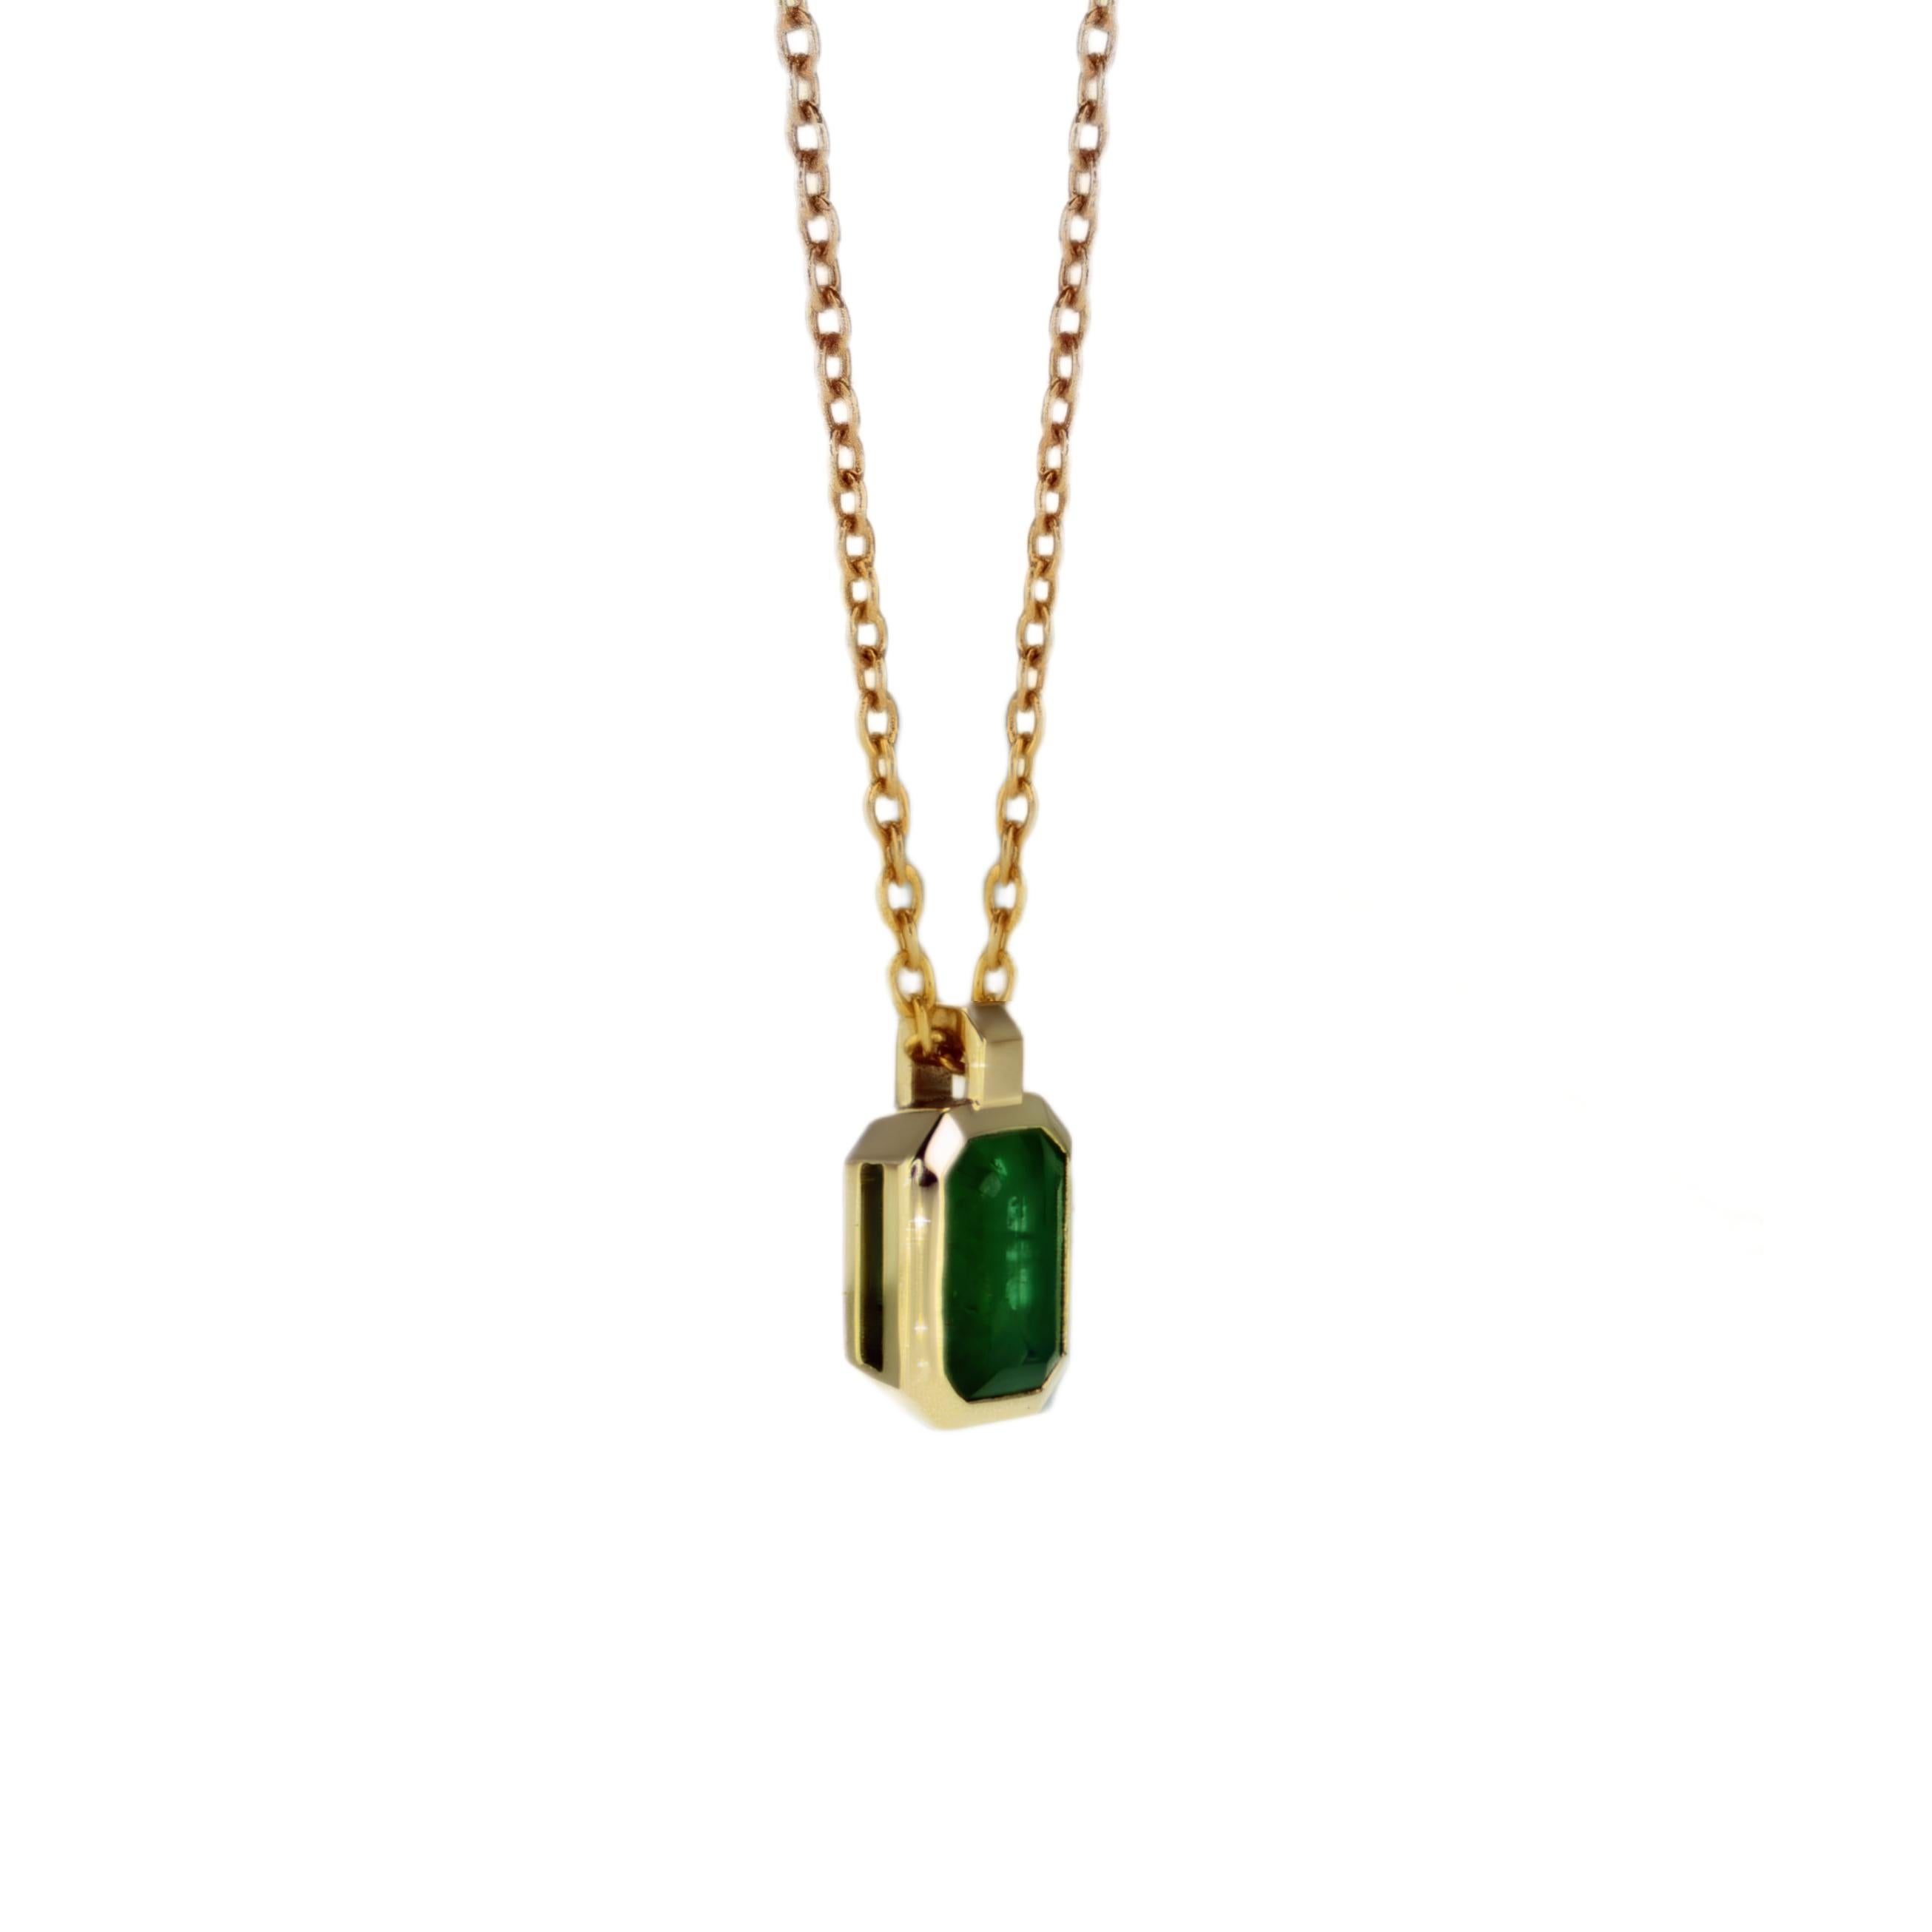 14K Yellow Gold 0.45CT Radiant Emerald Pendant ,Bezel Setting

Product Description:

Unveiling our Radiant Emerald Gold Pendant, a celebration of elegance and timeless beauty captured in 14K yellow gold. This pendant, featuring a 0.45CT radiant